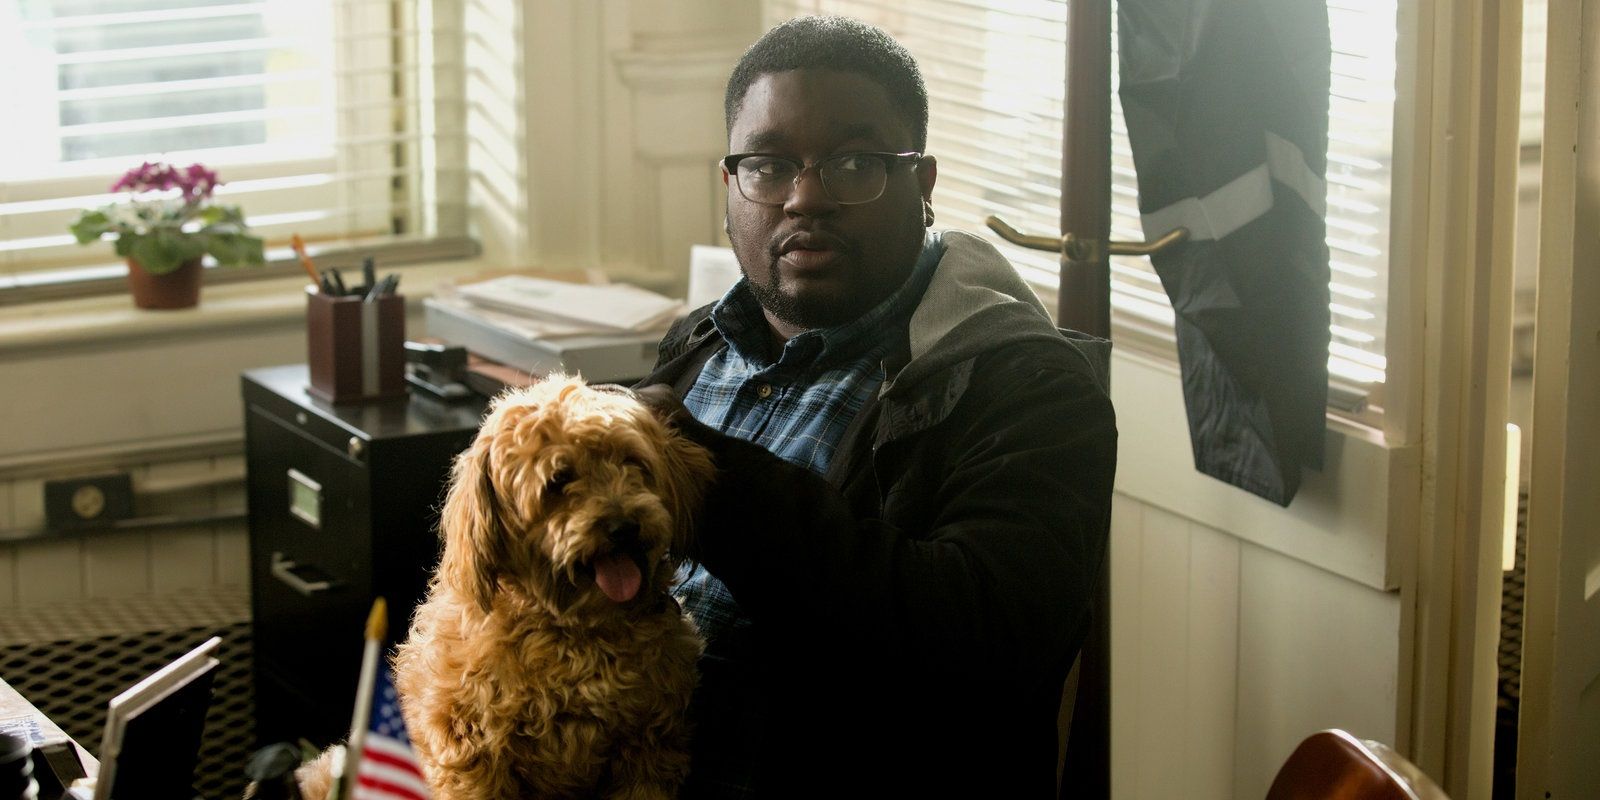 Lil Rel Howery as Rod holding his dog in Get Out.